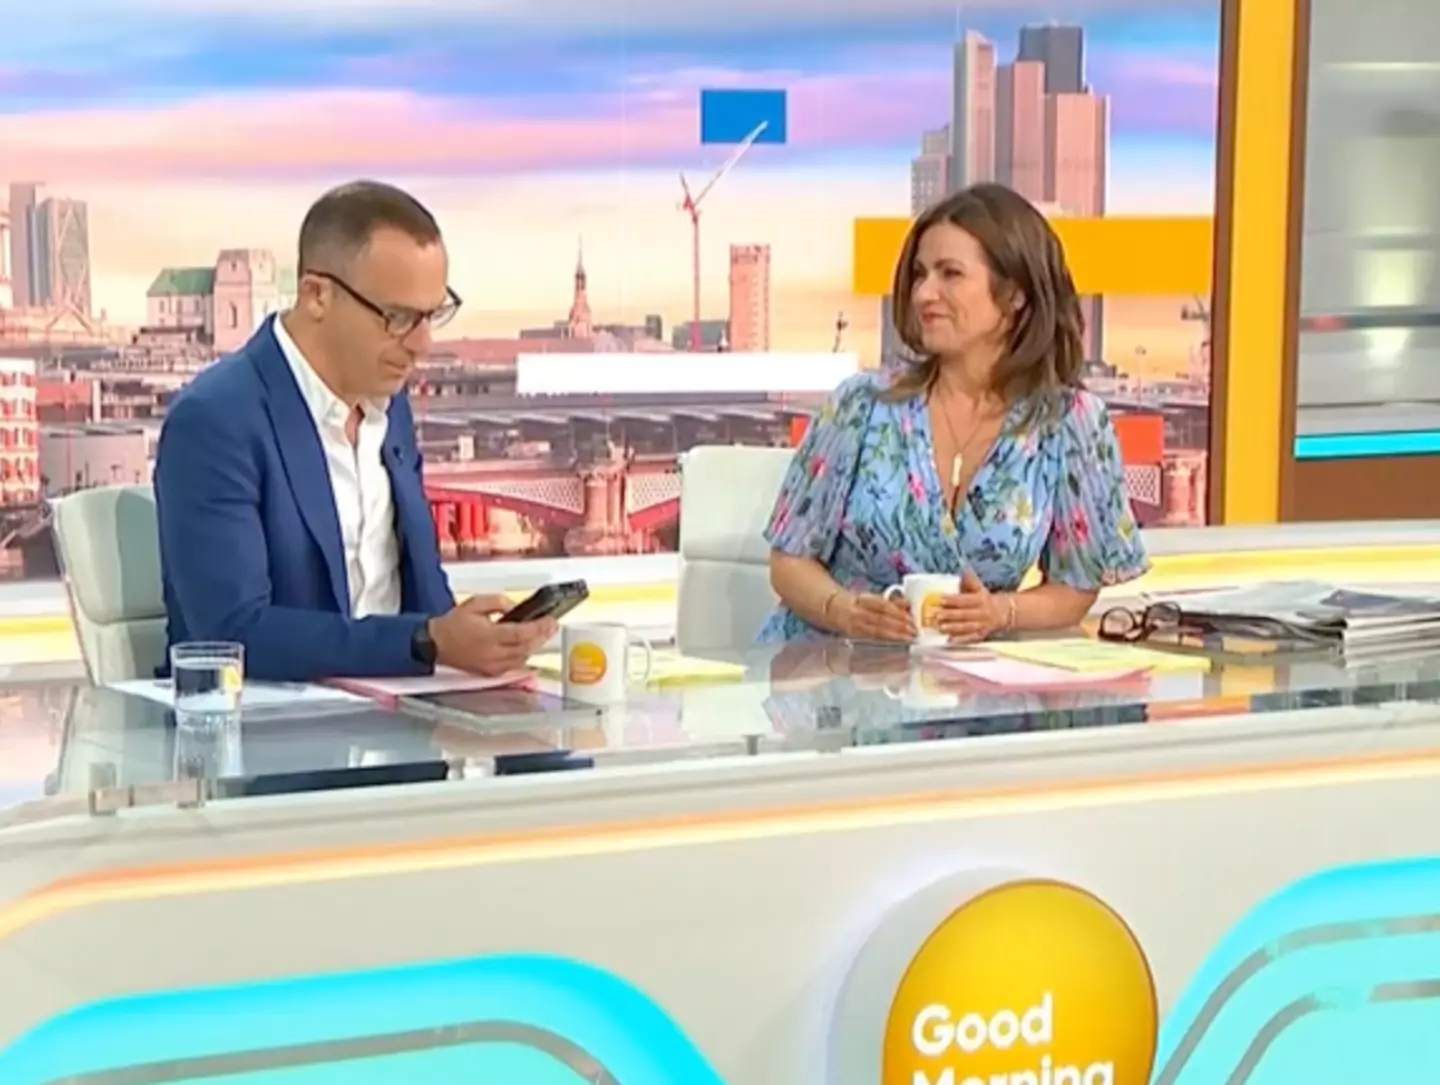 Martin Lewis shared the letter on Good Morning Britain.